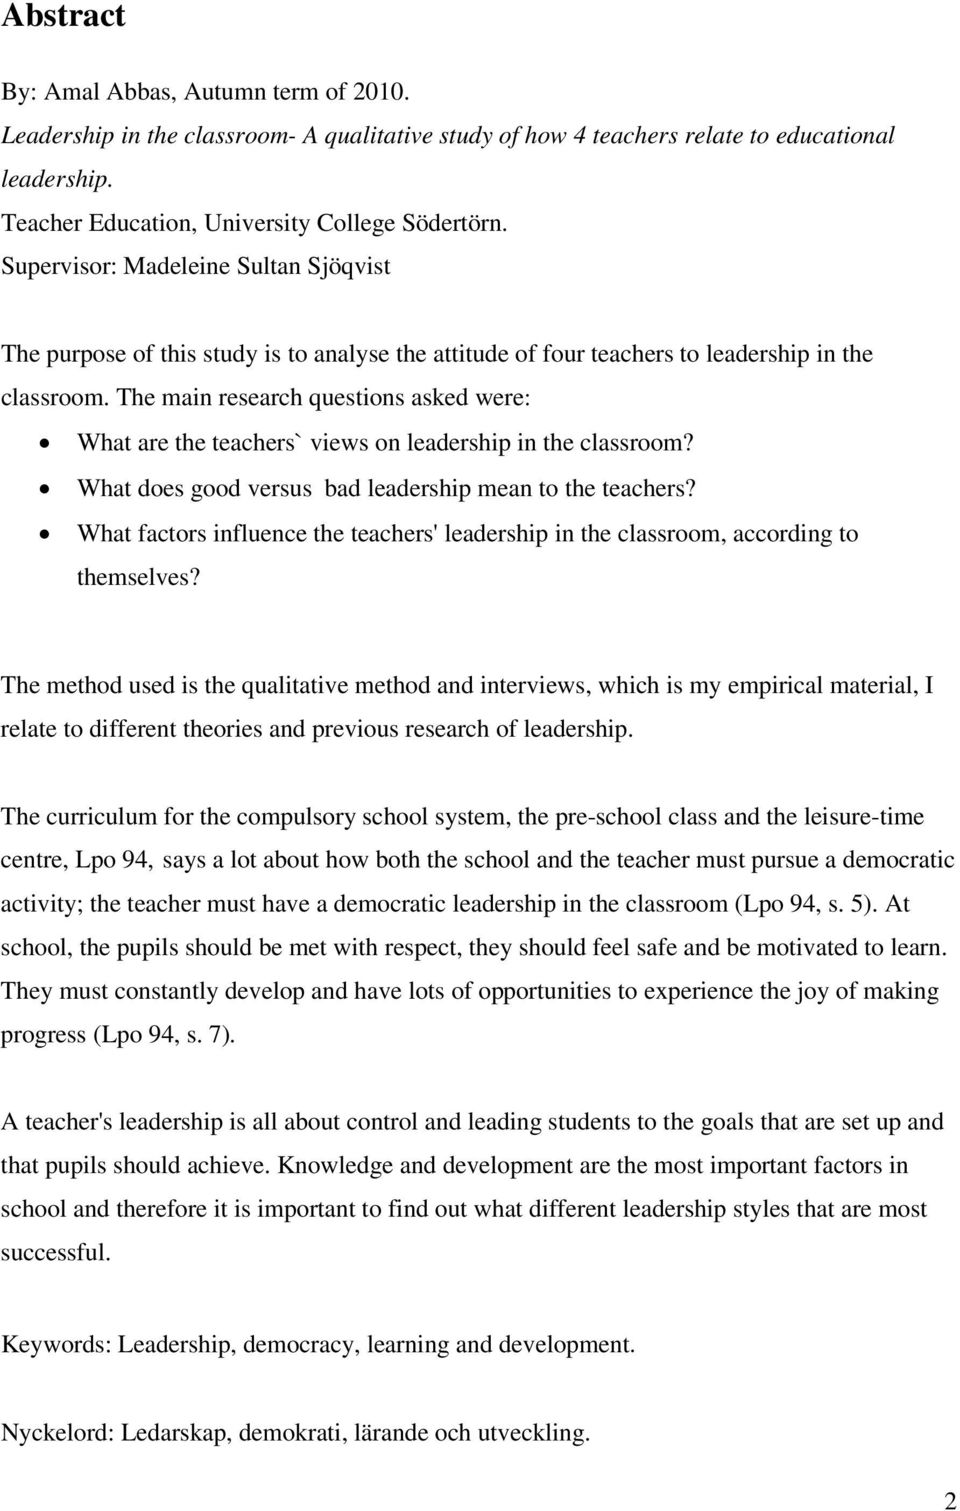 The main research questions asked were: What are the teachers` views on leadership in the classroom? What does good versus bad leadership mean to the teachers?